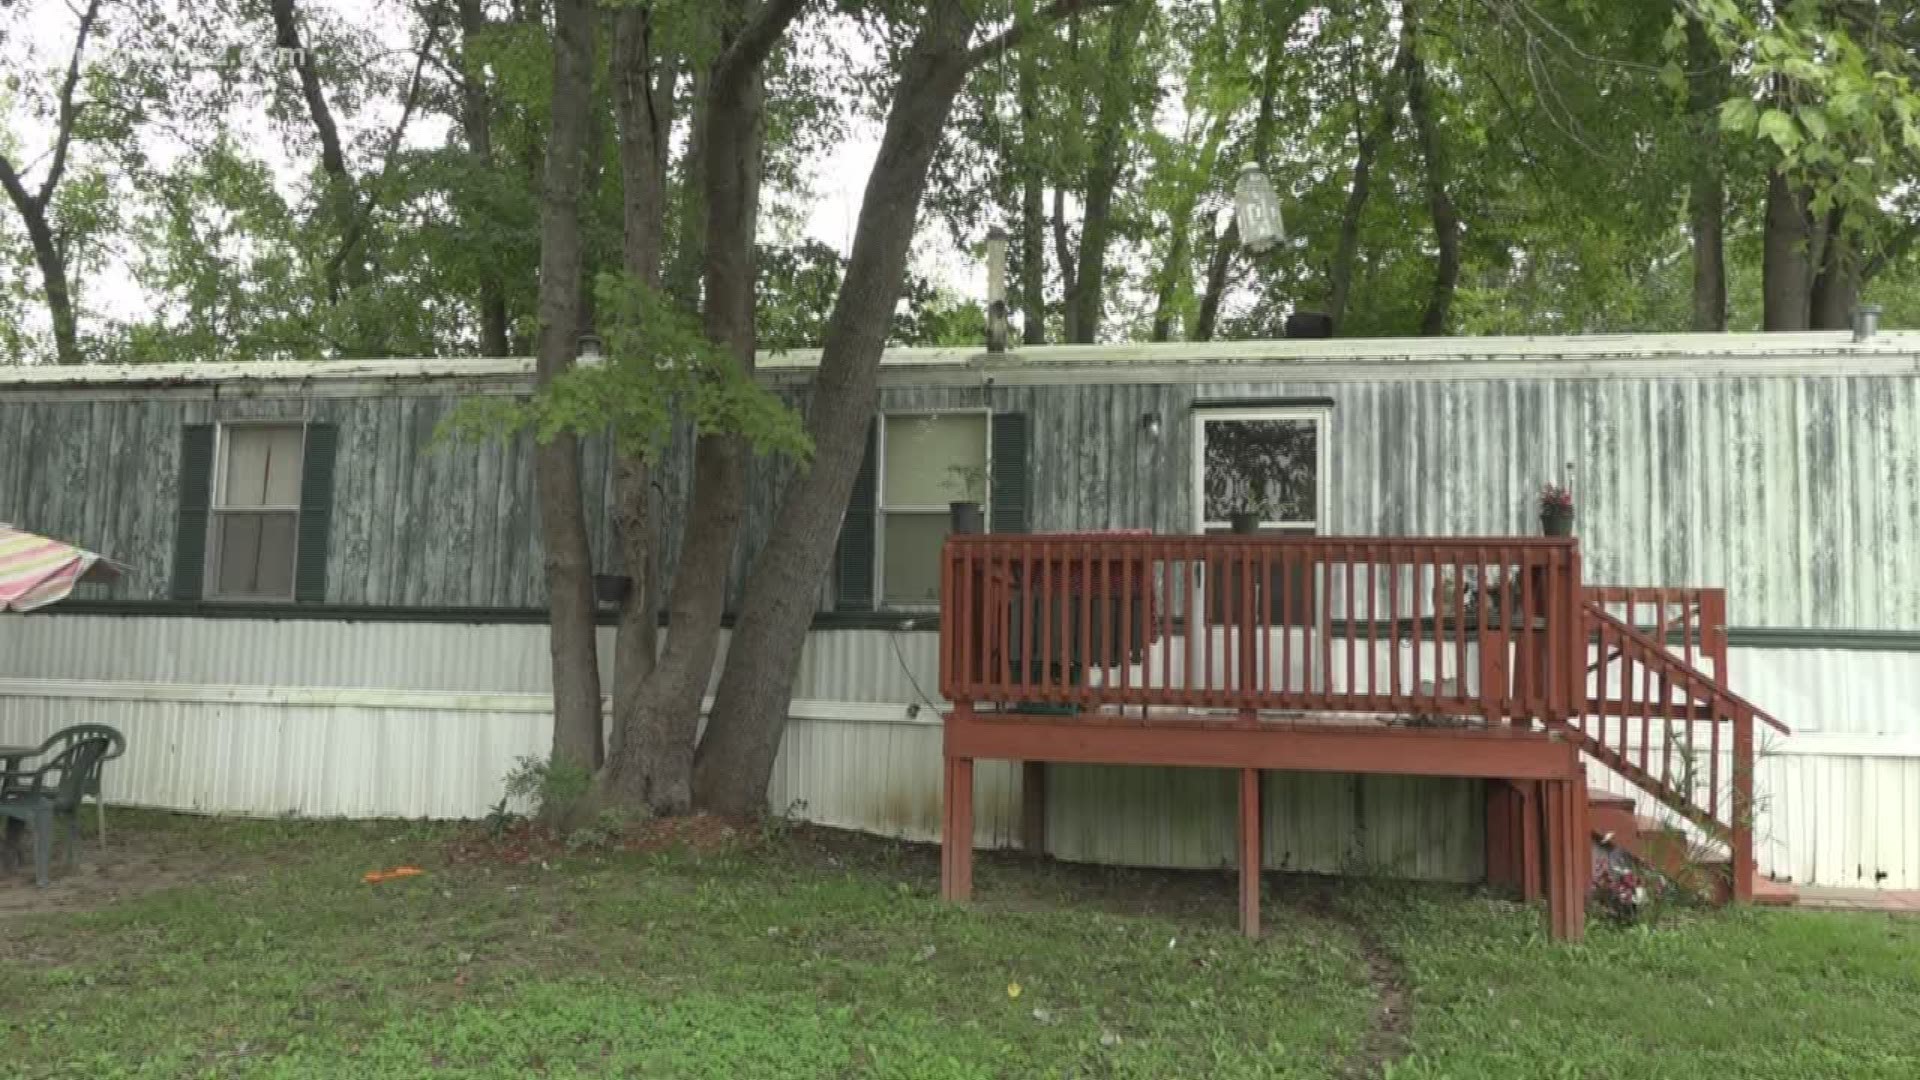 Woman tries to sell her mobile home, only to be told she needs things like a VIN and title before she can sell.